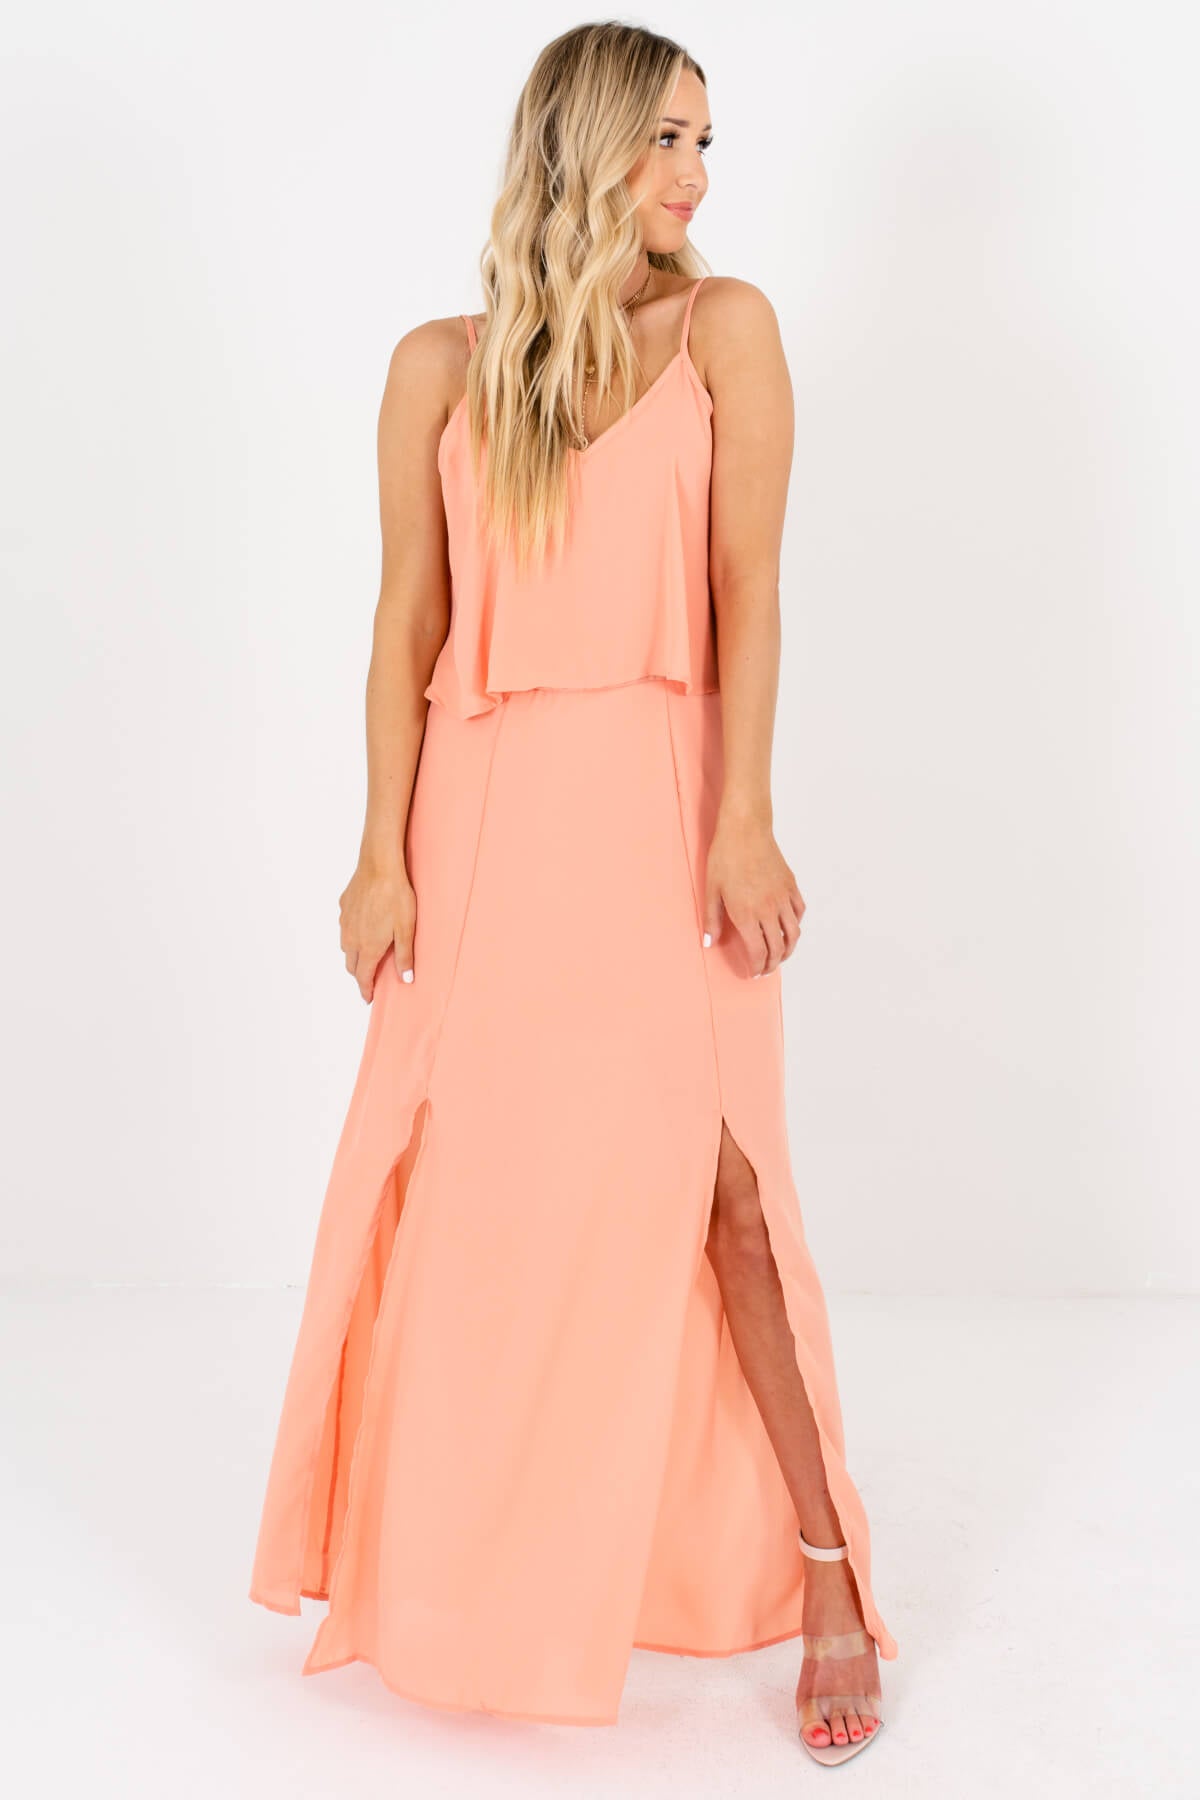 Peach Pink Ruffle Overlay Bodice Boutique Maxi Dresses for Women